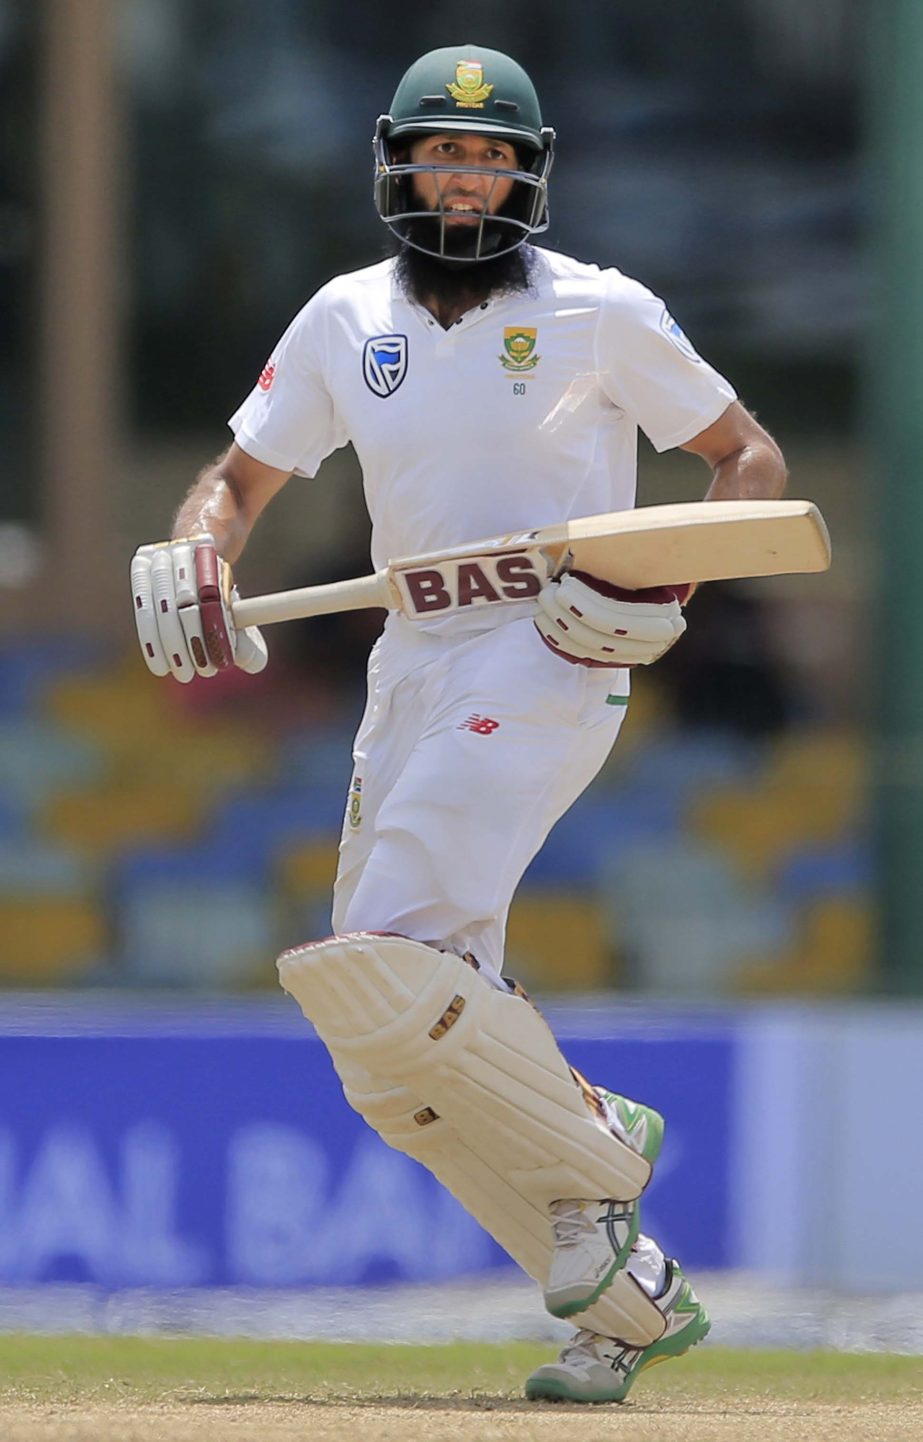 South Africa's Hashim Amla runs between the wickets during the second dayâ€™s play of their second Test cricket match against Sri Lanka in Colombo, Sri Lanka on Saturday.